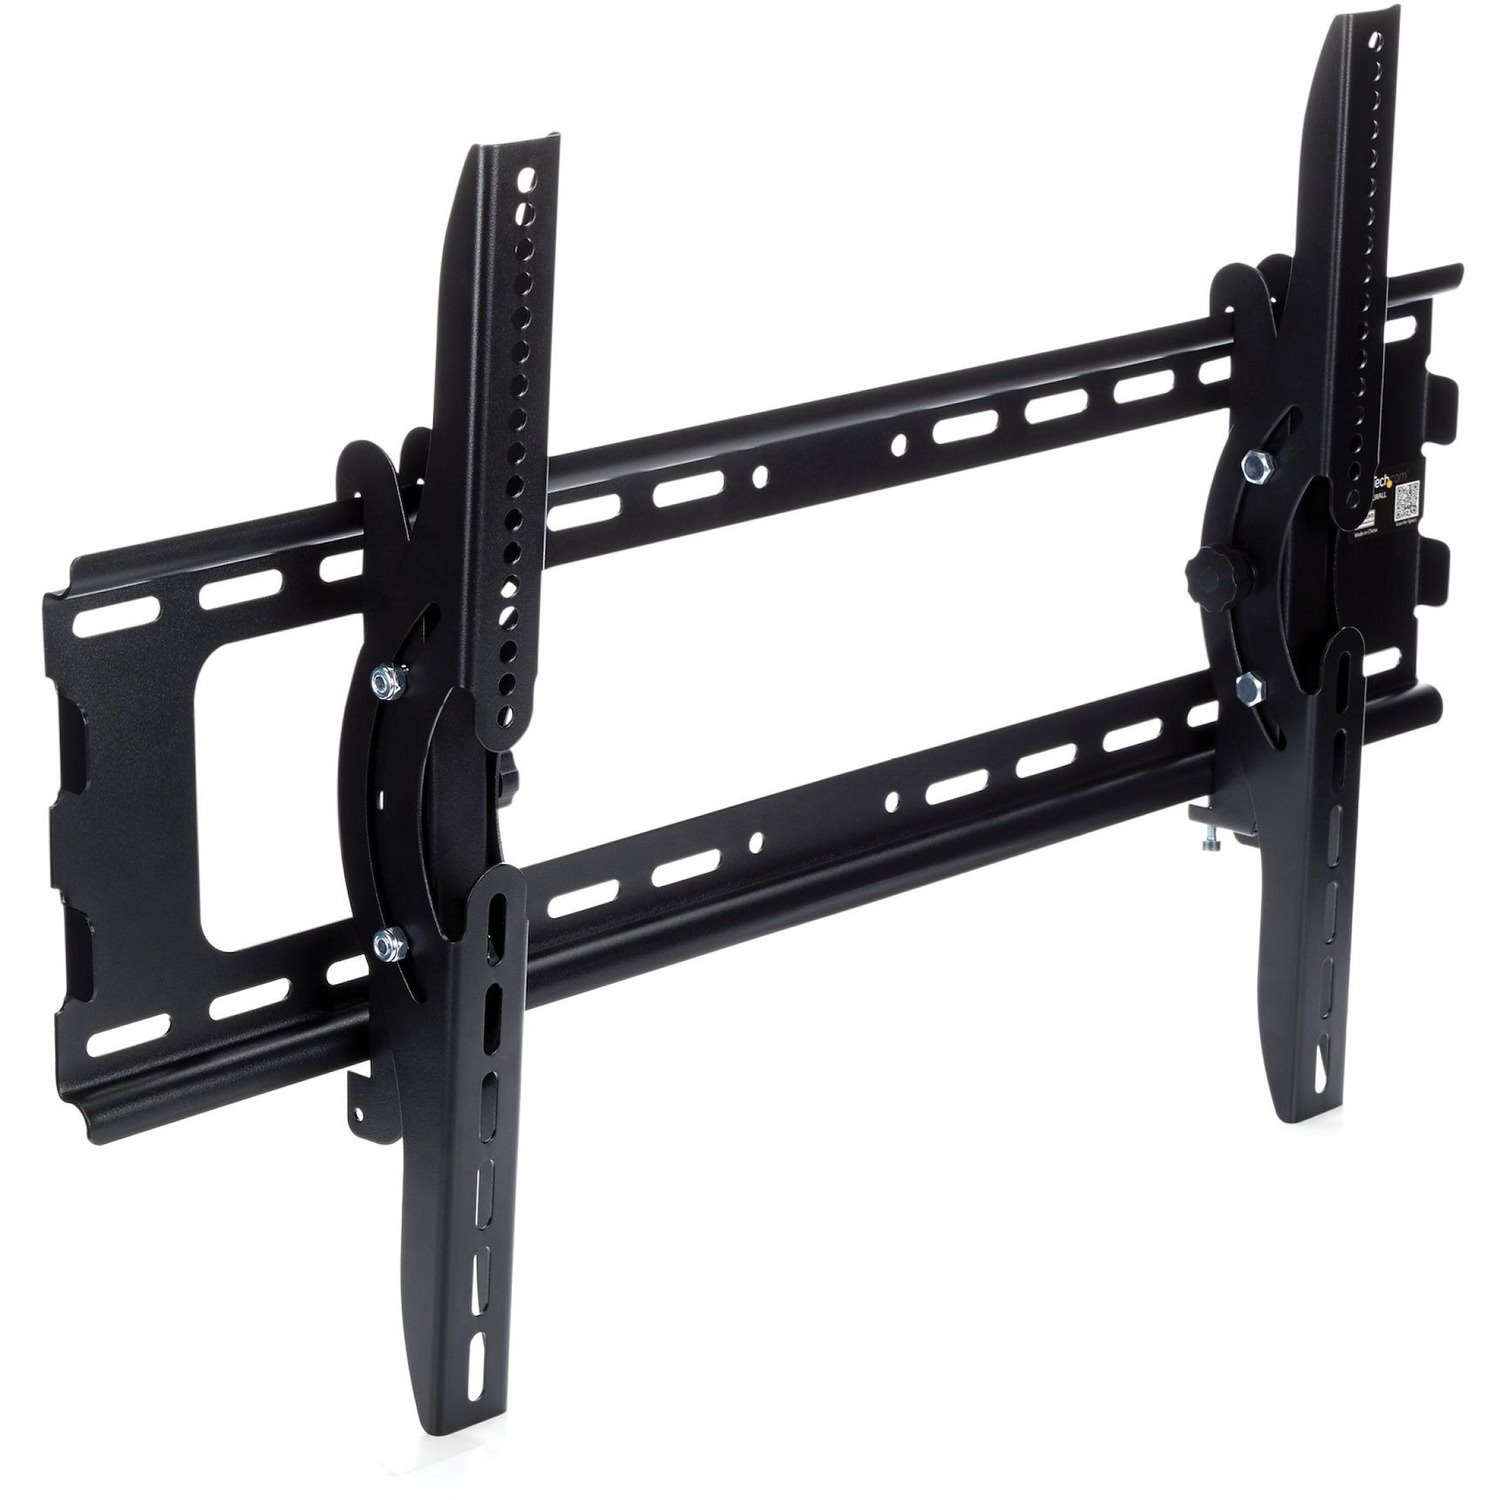 StarTech.com Wall Mount for TV, Monitor, Digital Signage Display, LCD Display, LED Display, Curved Screen Display - Black